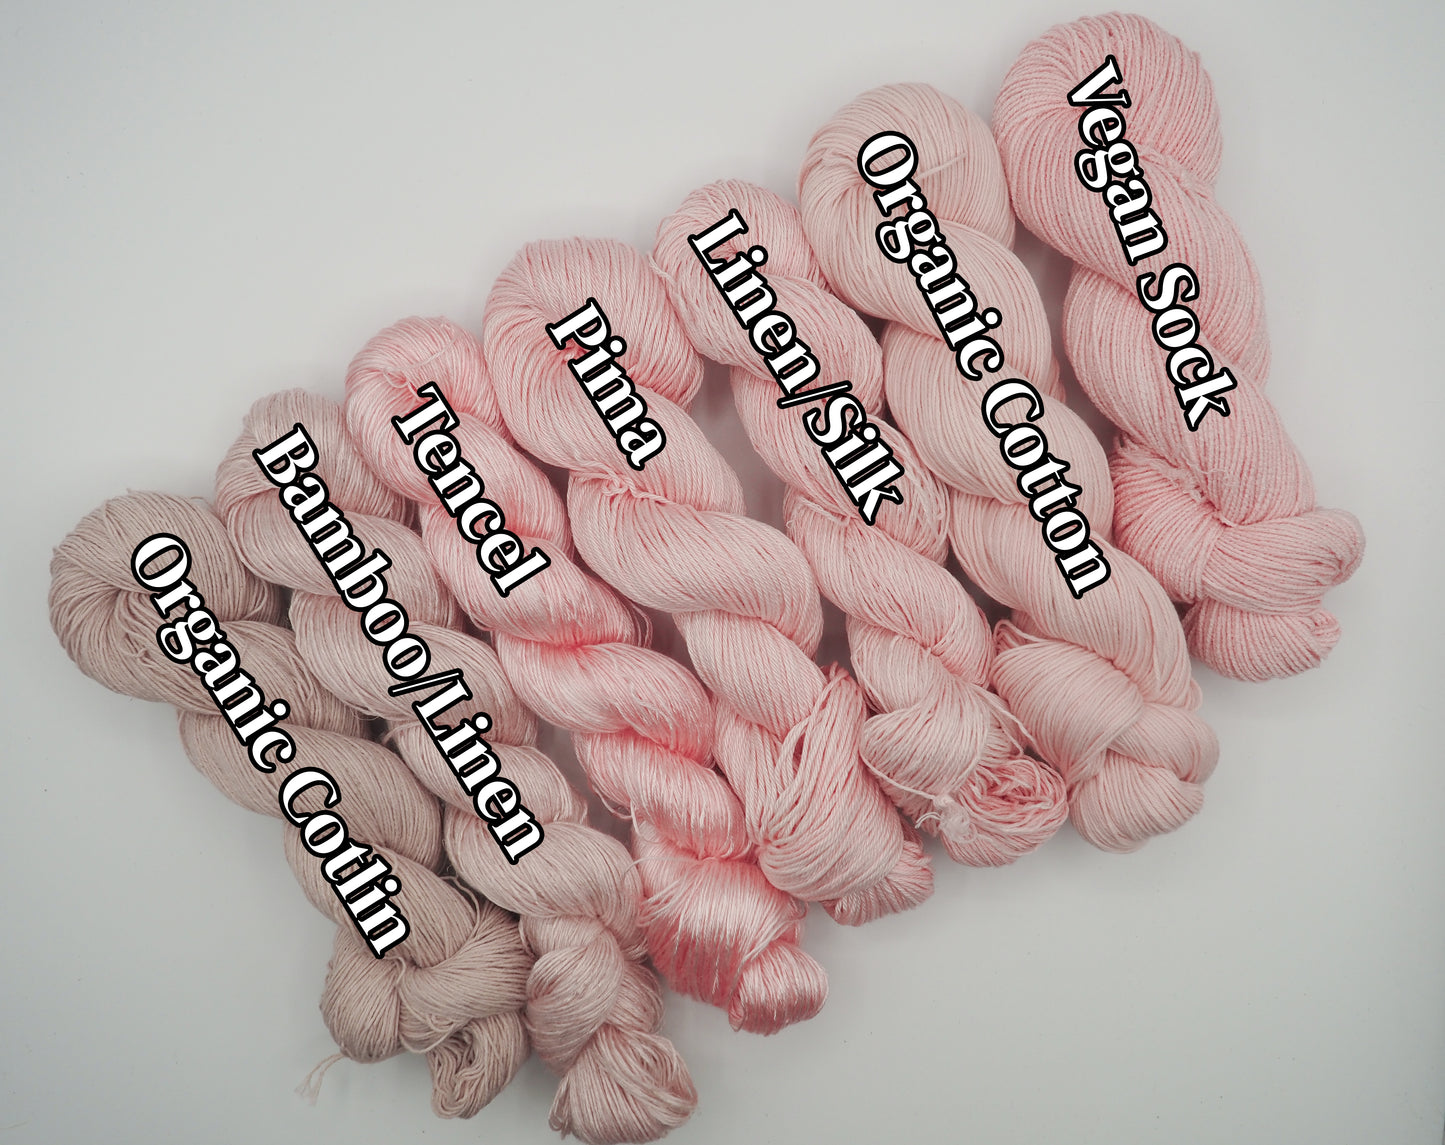 Spring Mini Skeins (25g) - dyed to order please allow 3-4 weeks for dyeing